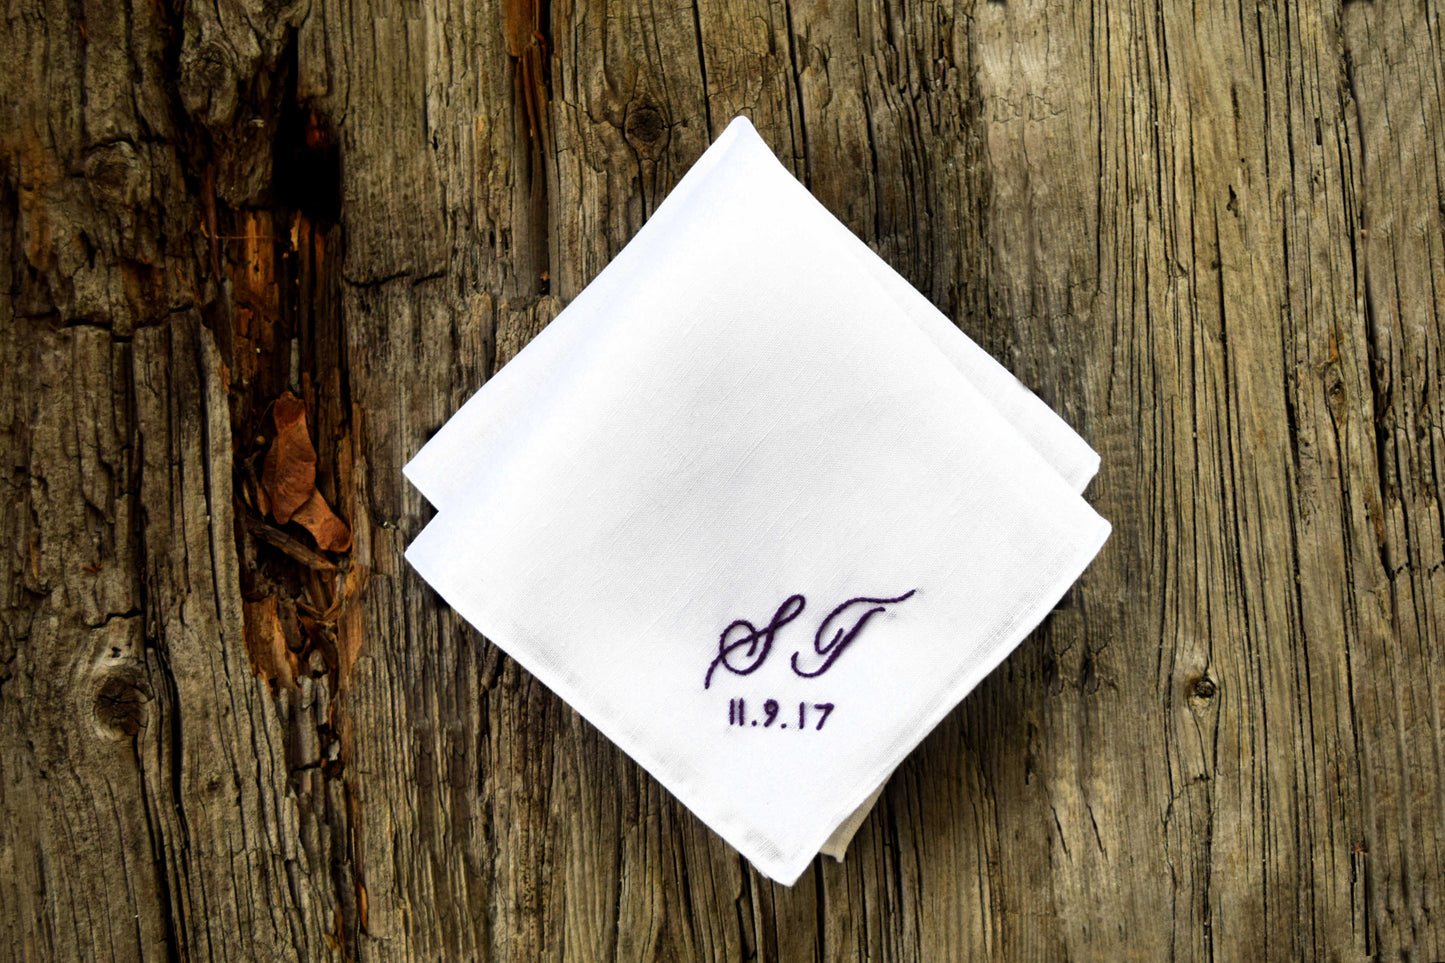 Monogrammed Handkerchief with Two Initials and Wedding Date